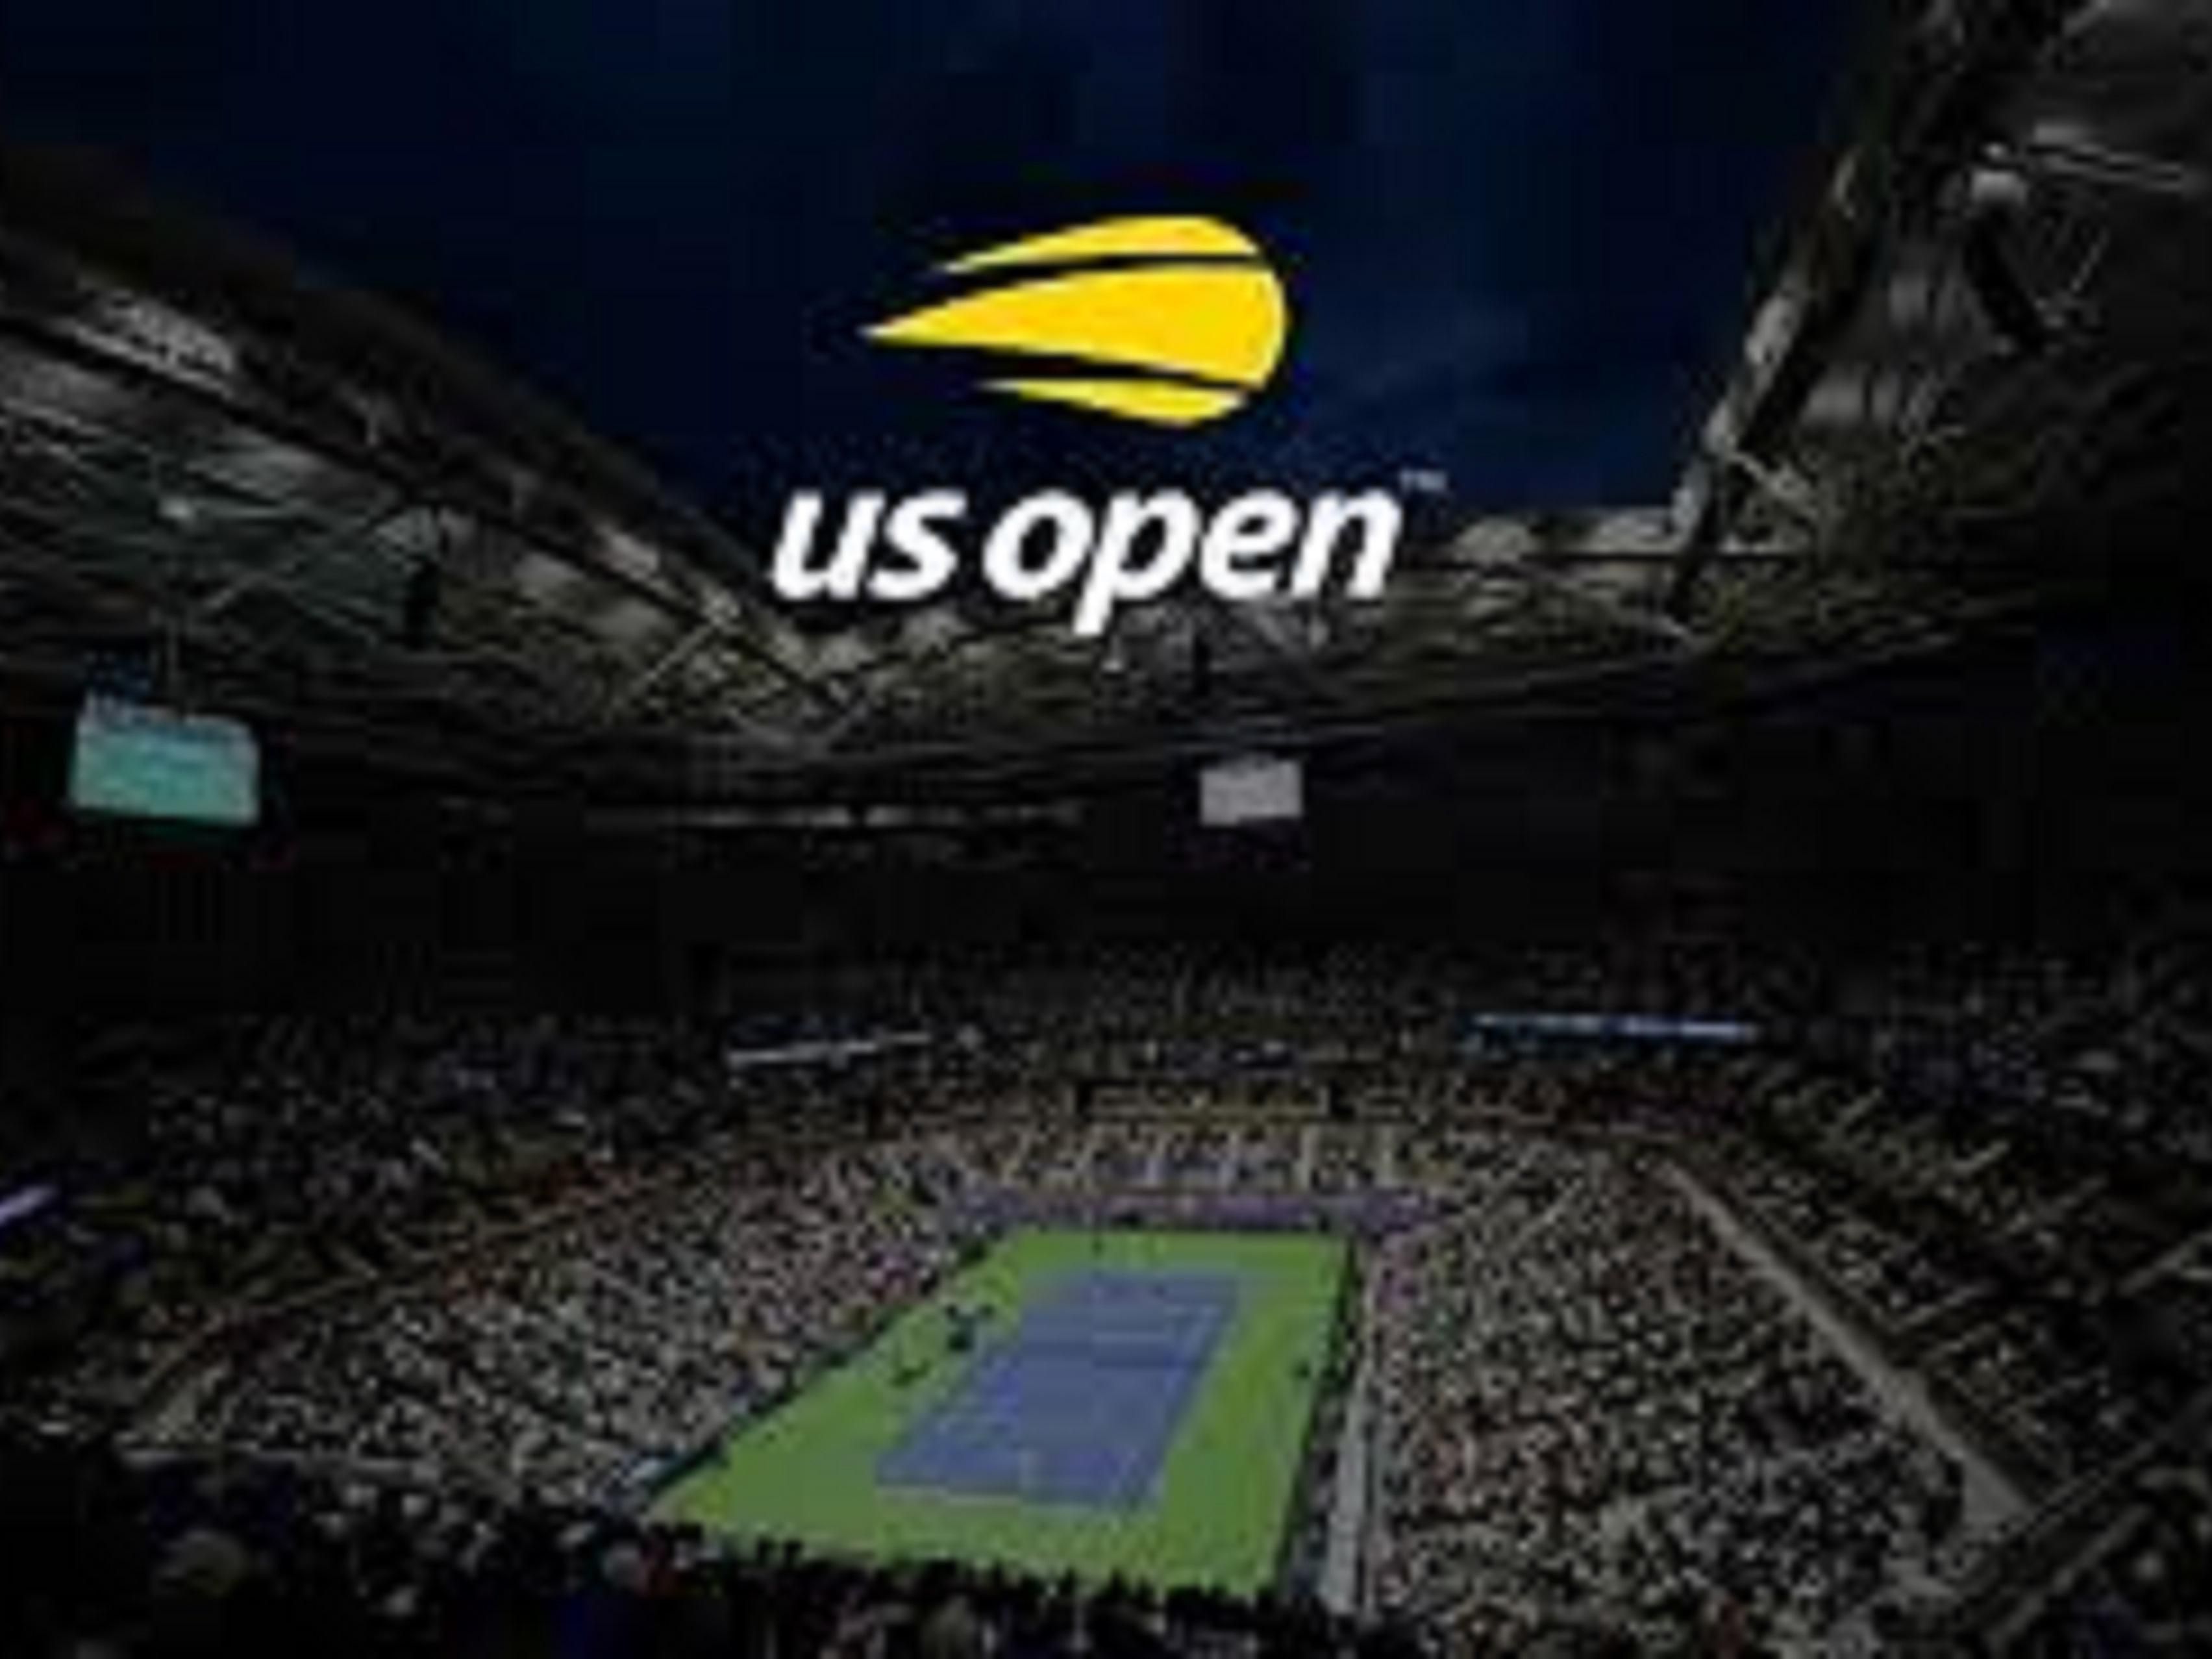 Are you ready for the US Open